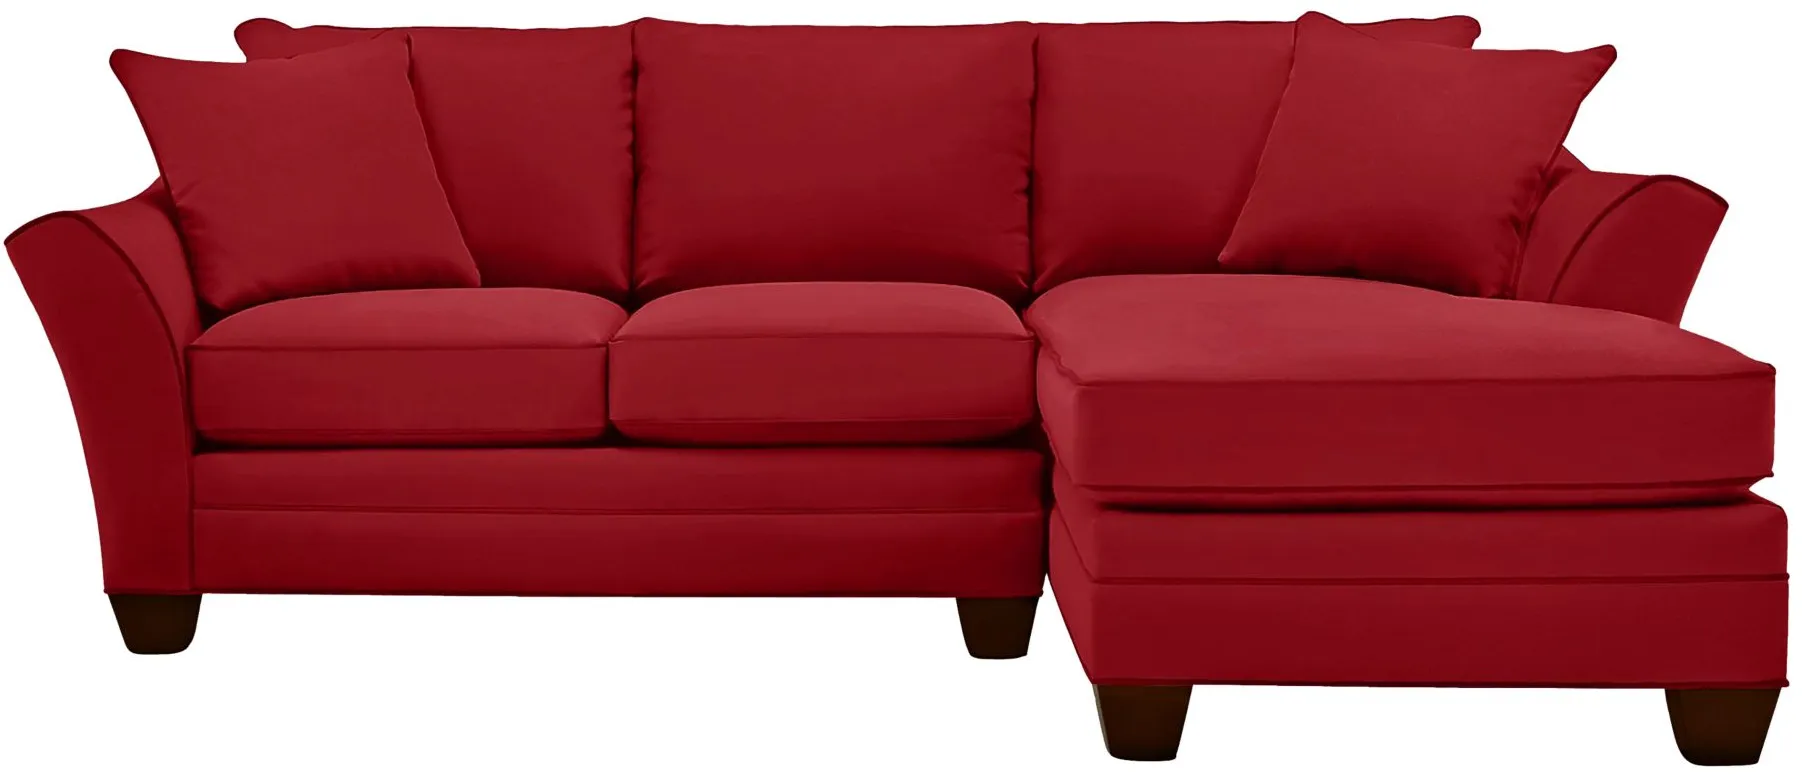 Foresthill 2-pc. Right Hand Chaise Sectional Sofa in Suede So Soft Cardinal by H.M. Richards